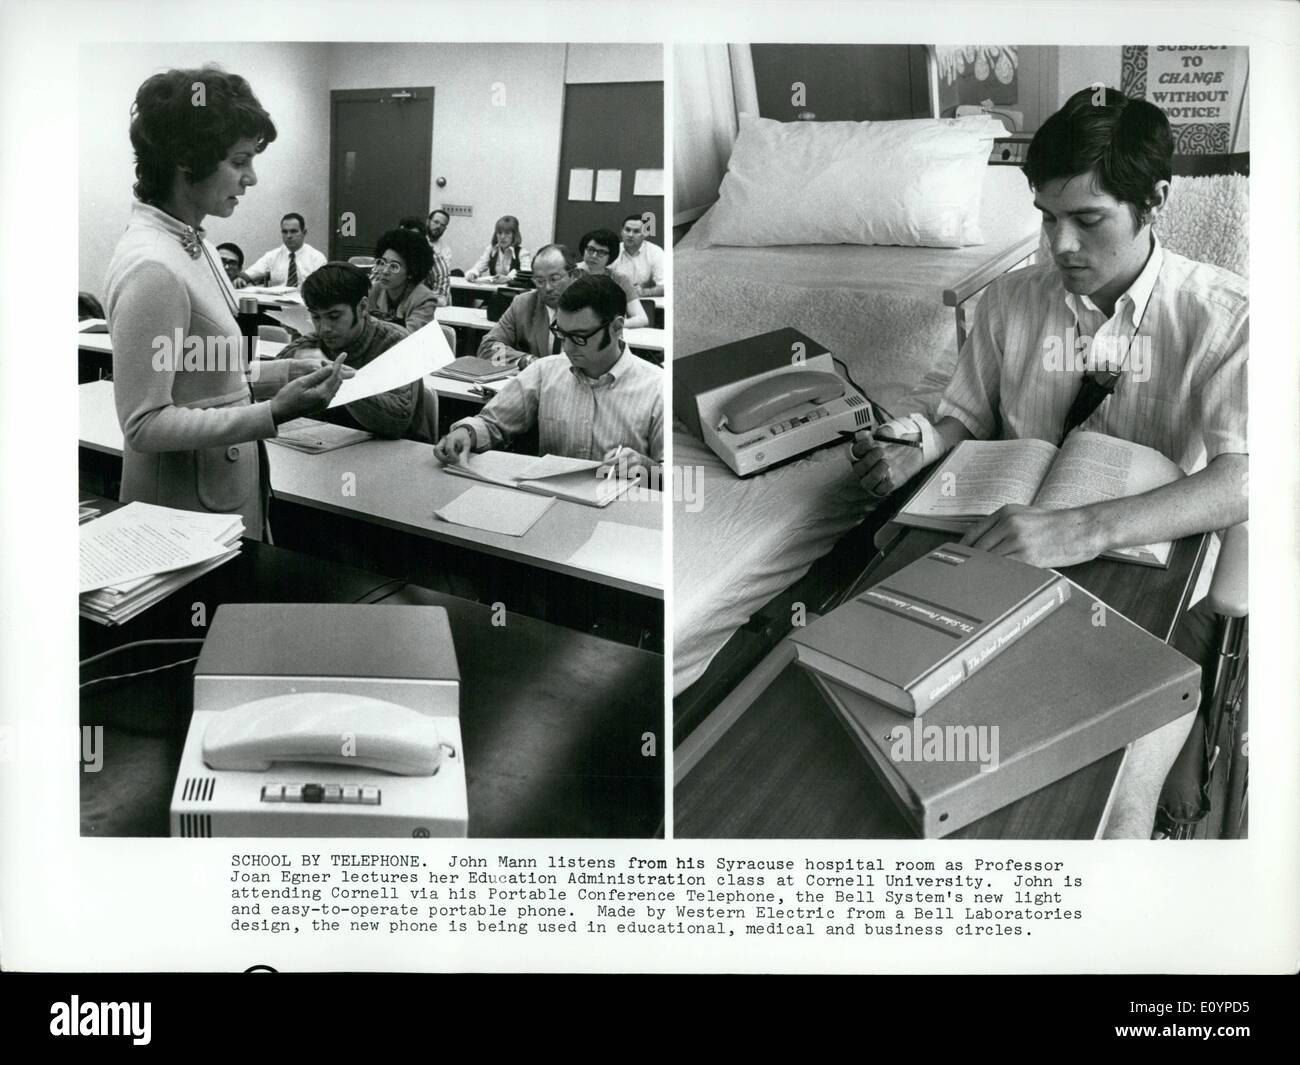 Feb. 02, 1971 - School By Telephone: John Mann listens from his Syracuse hospital room as Professor Joan Egner lectures her Education Administration class at Cornell University. John is attending Cornell via his Portable Conference Telephone, the Bell System's new light and easy-to-operate portable phone. Made by Western Electric from a Bell Laboratories design, the new phone is being used in educational, medical and business circles. Stock Photo